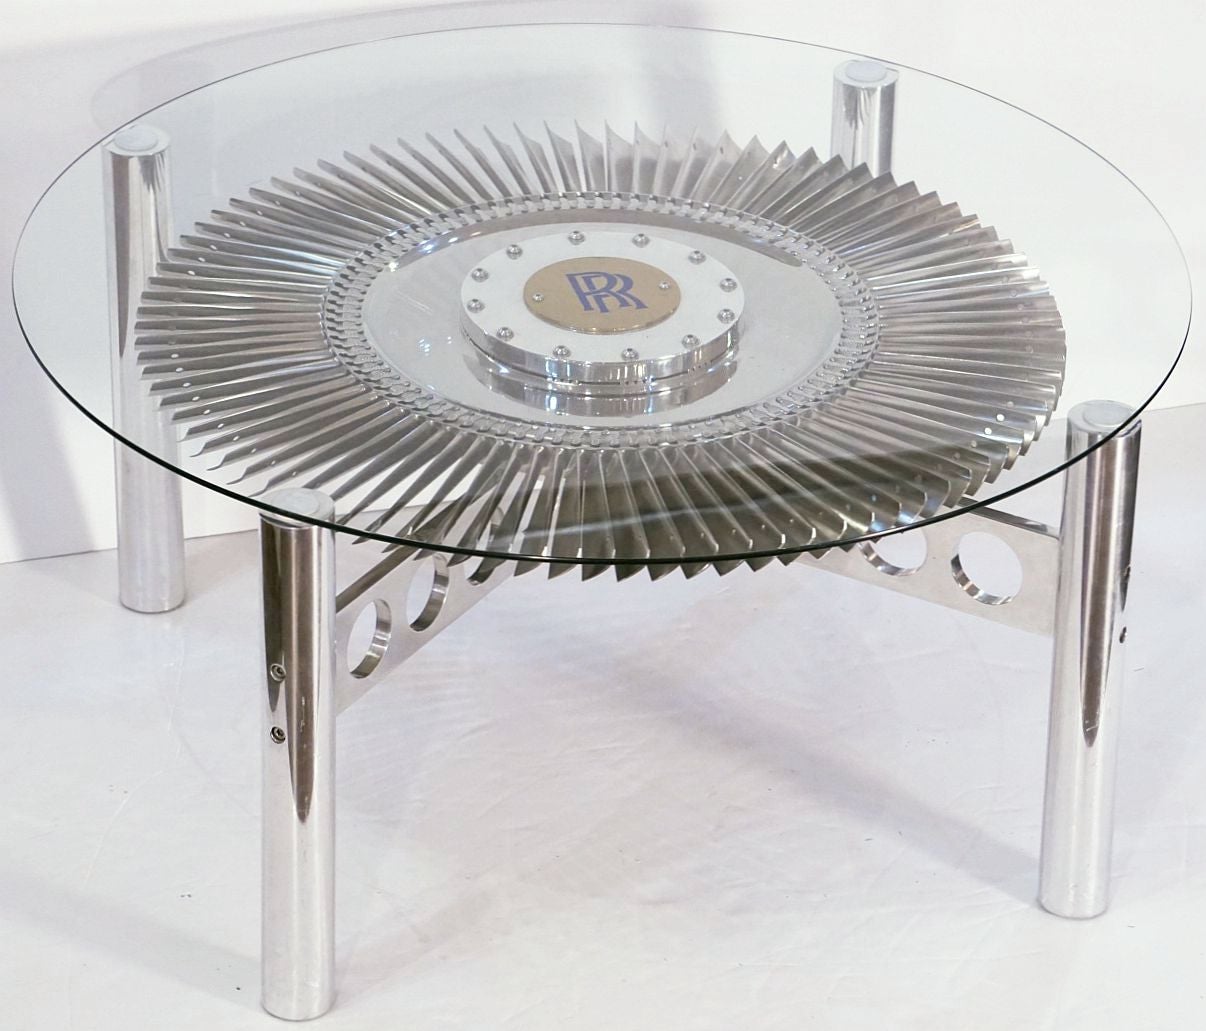 A stylish low cocktail or coffee table from England, featuring a round glass top (41 3/4 inches diameter) set upon a base with an authentic Rolls Royce rotating impeller from a British military jet engine, mounted to a four-post frame of tubular